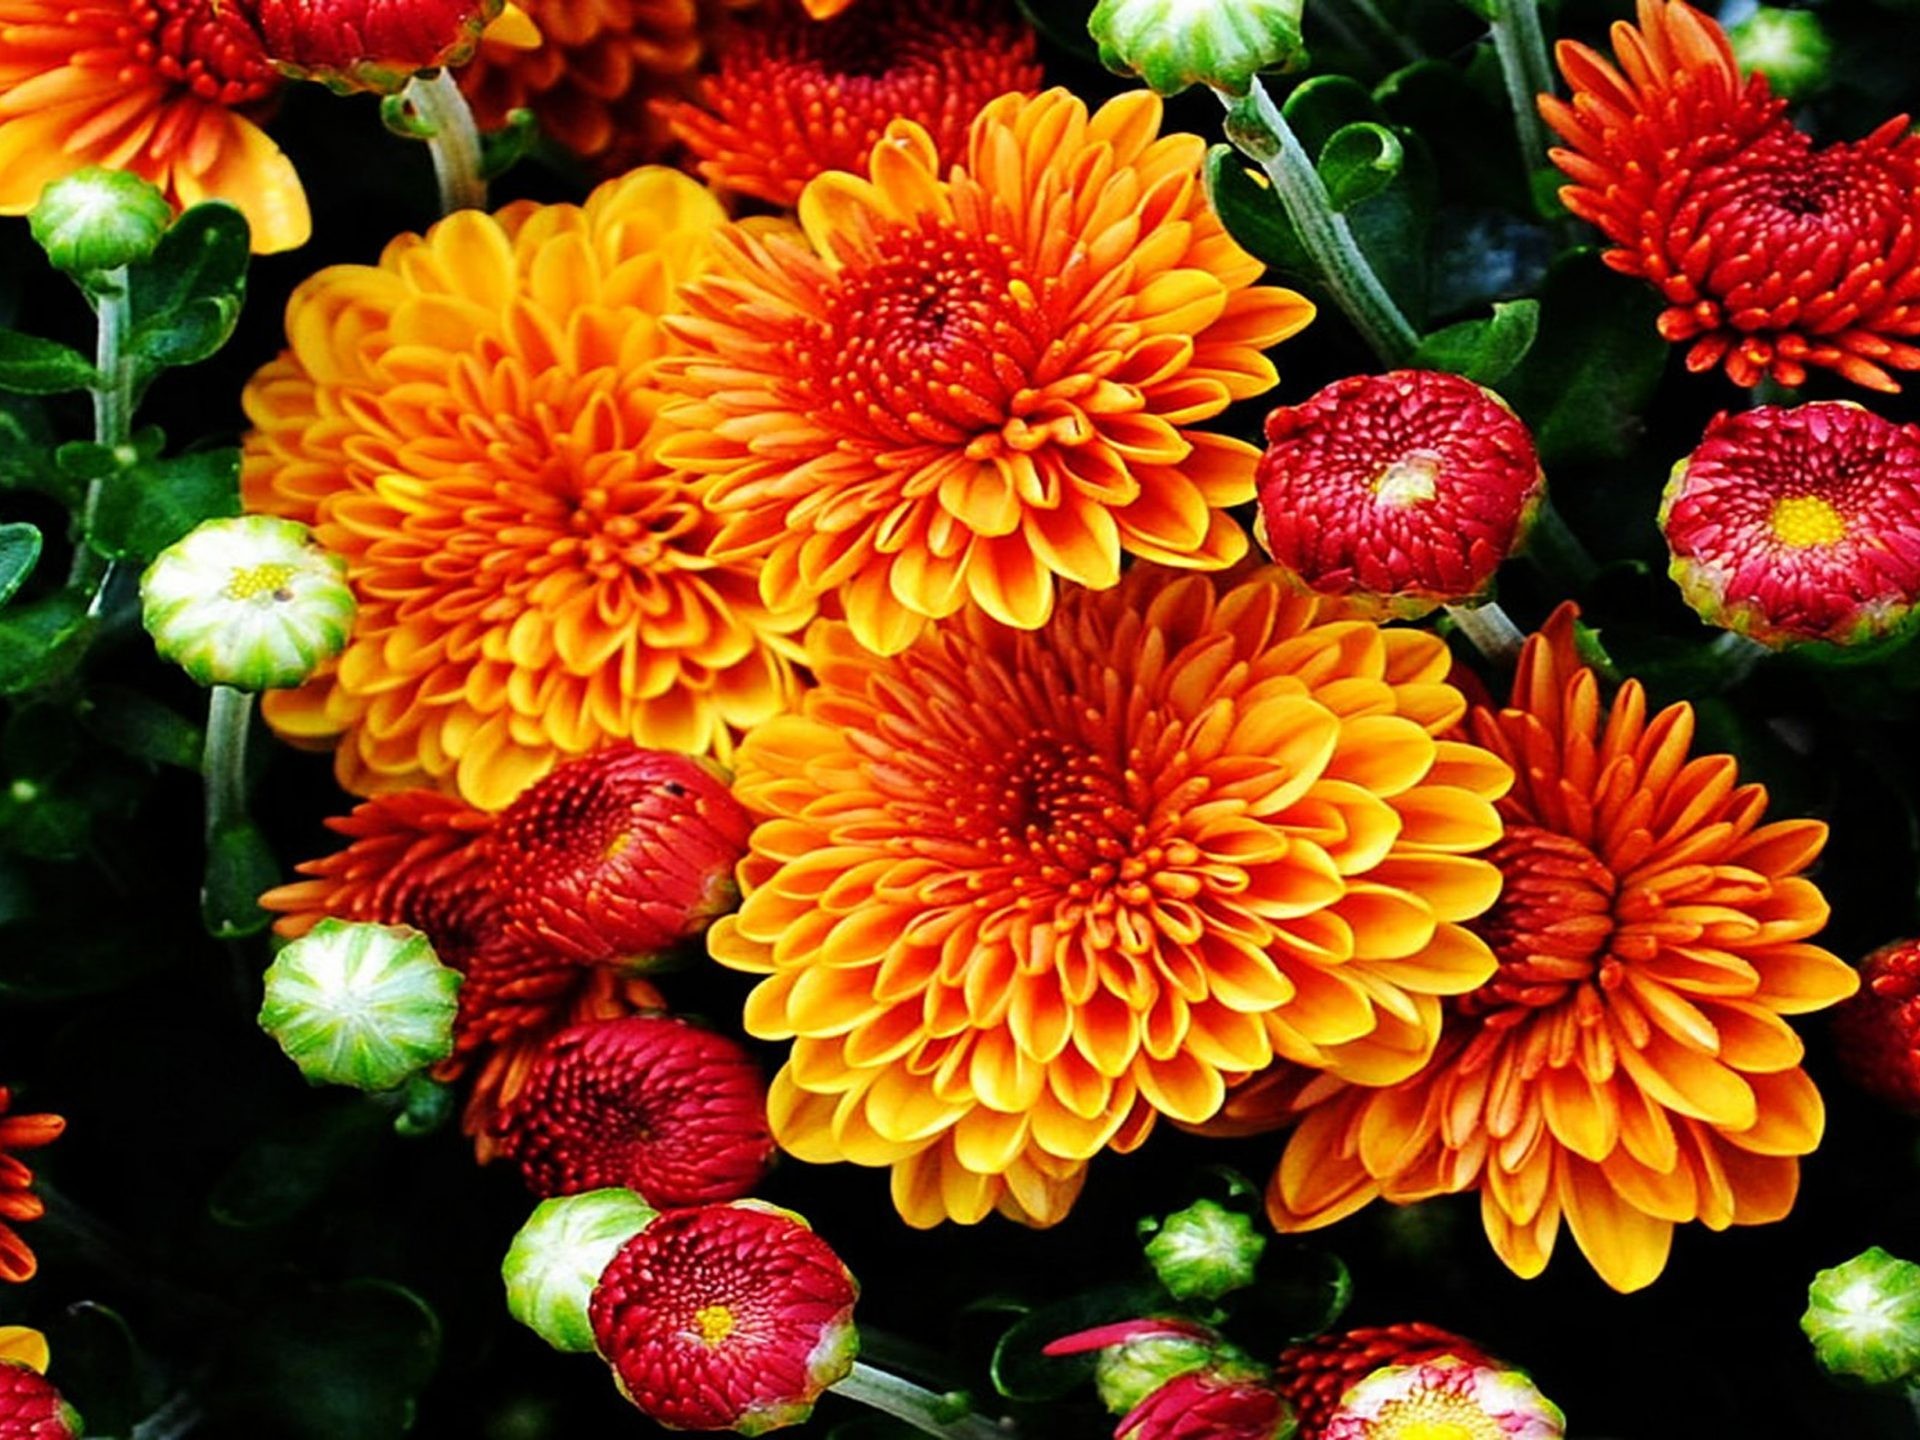 1920x1440 Fall Mums Colored Flowers From The Garden With A Beautiful